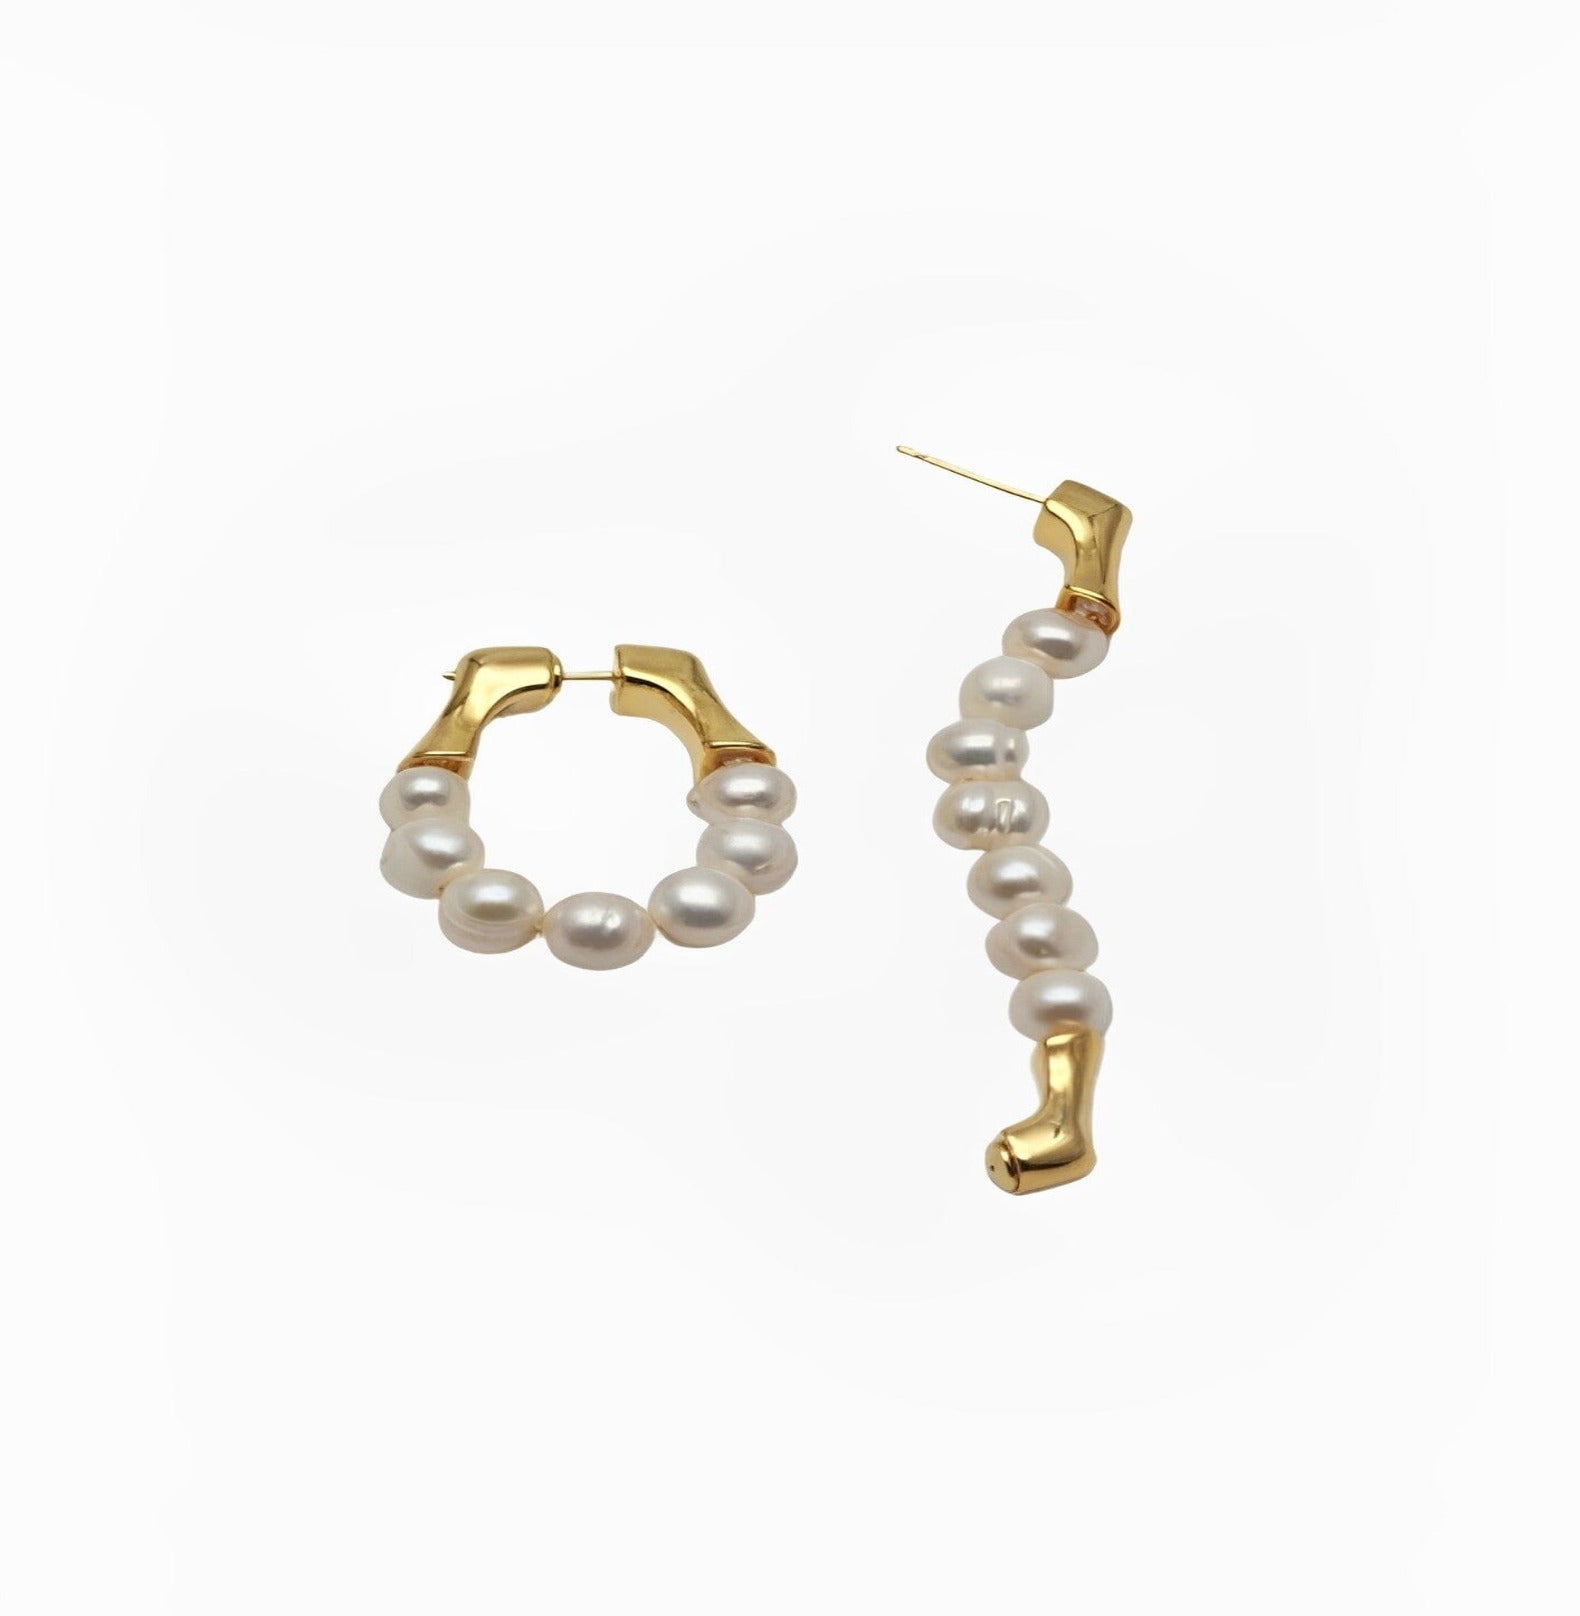 ETERNITY PEARL EARRINGS ring Yubama Jewelry Online Store - The Elegant Designs of Gold and Silver ! 